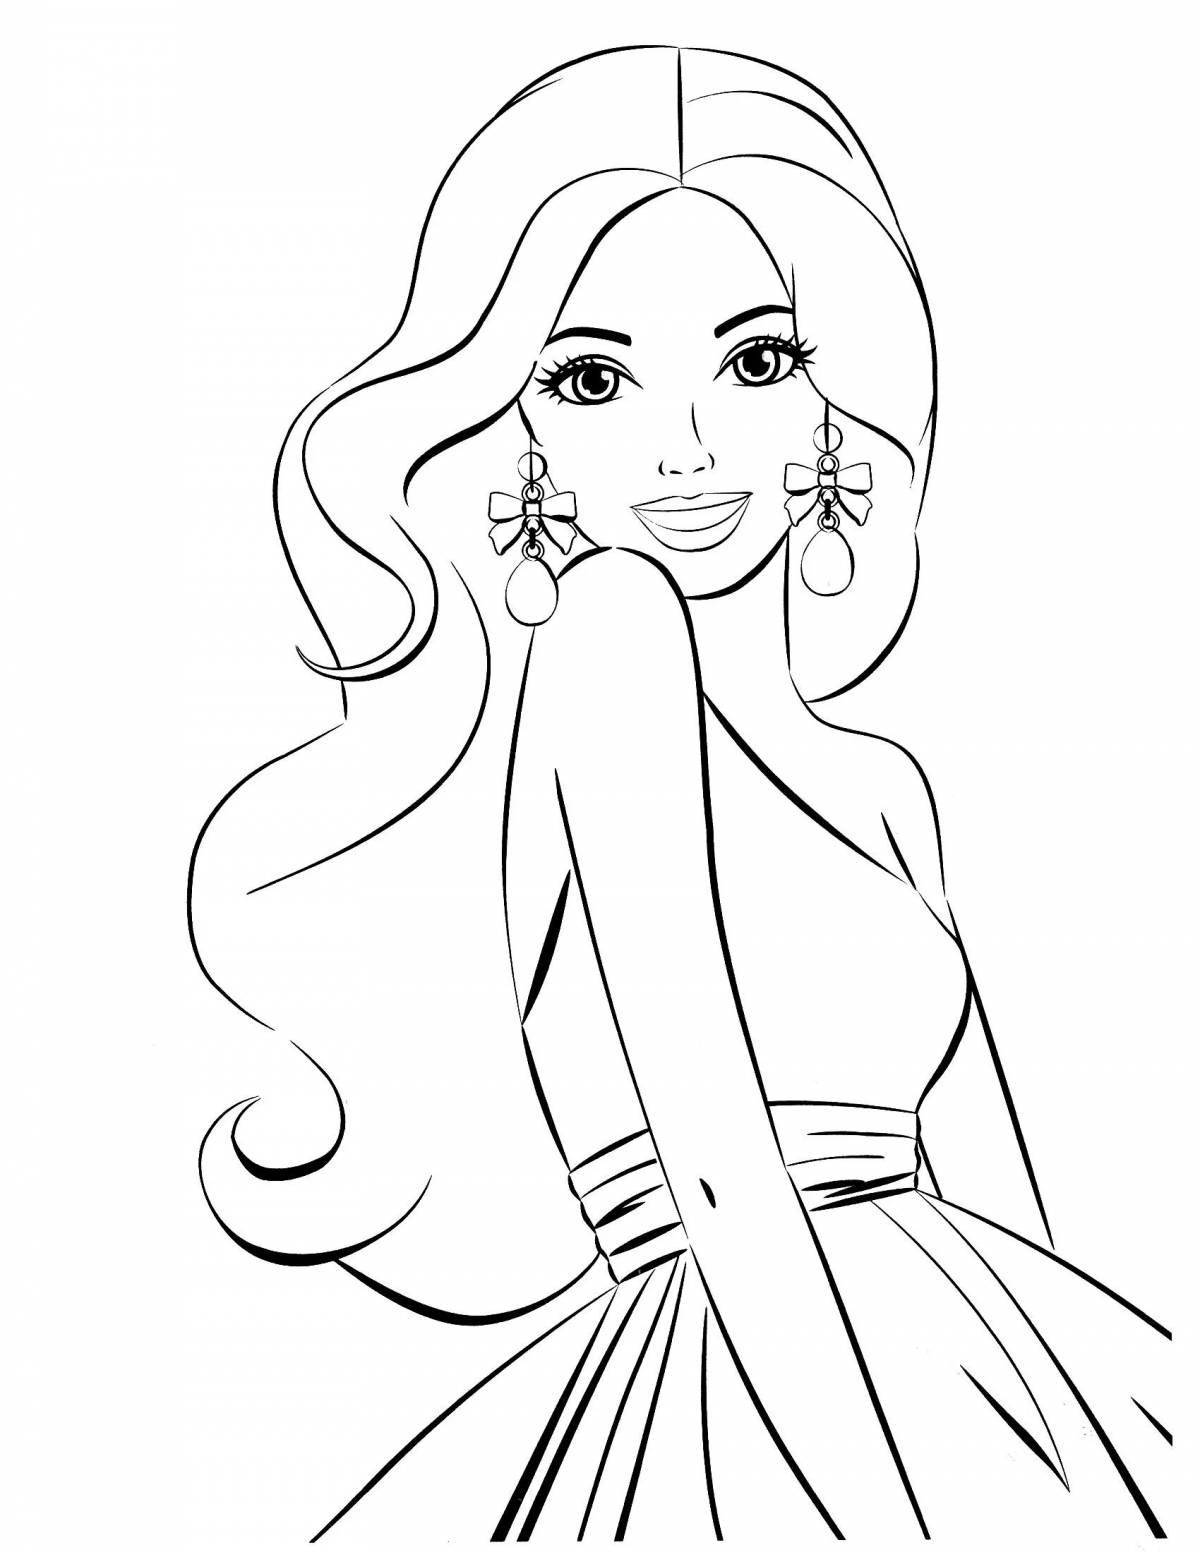 Funny woman coloring book for kids